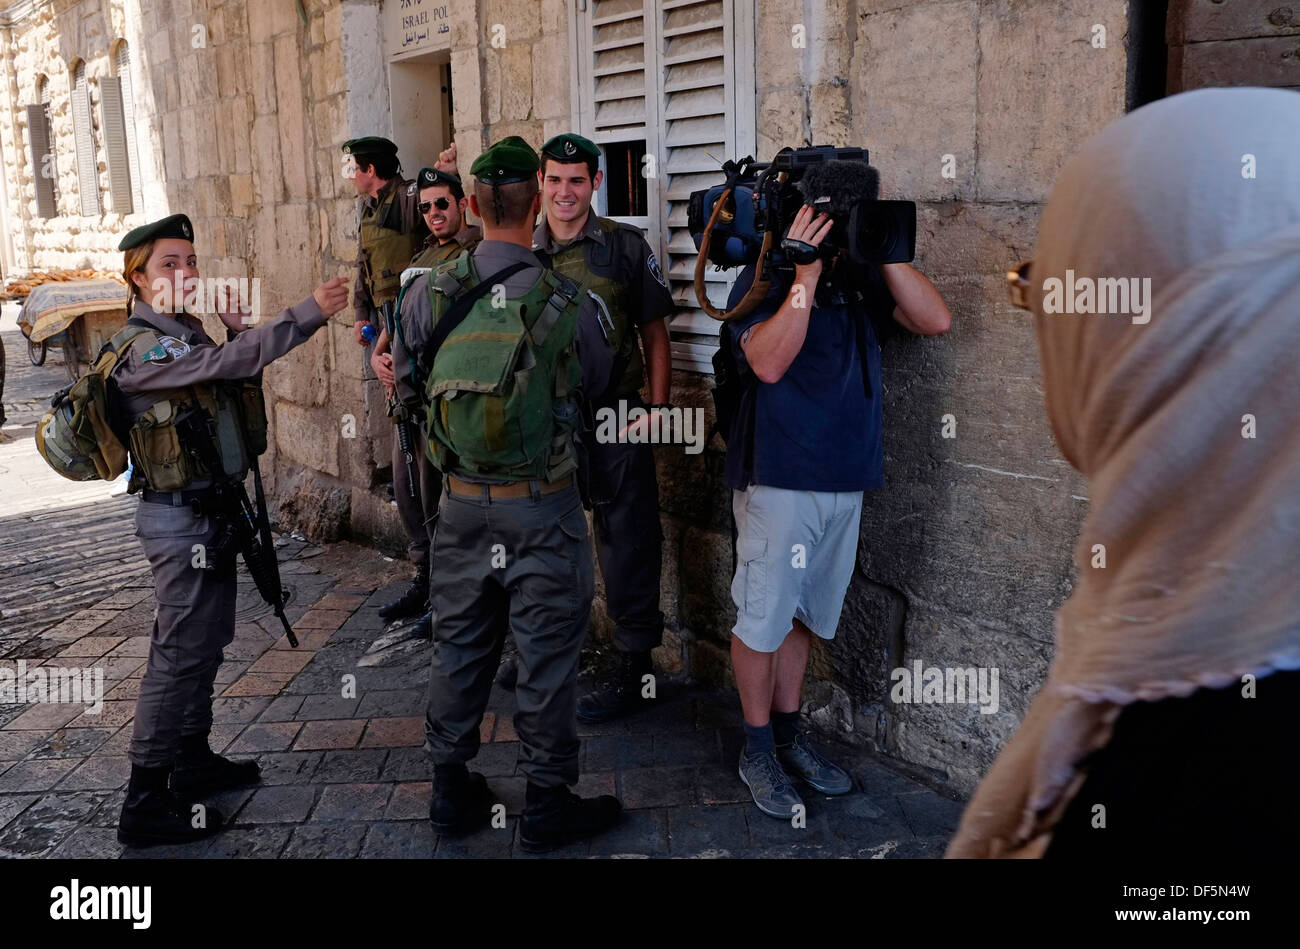 A TV cameraman filming in the old city of Jerusalem amid Israeli border police and Palestinian pedestrians Israel Stock Photo